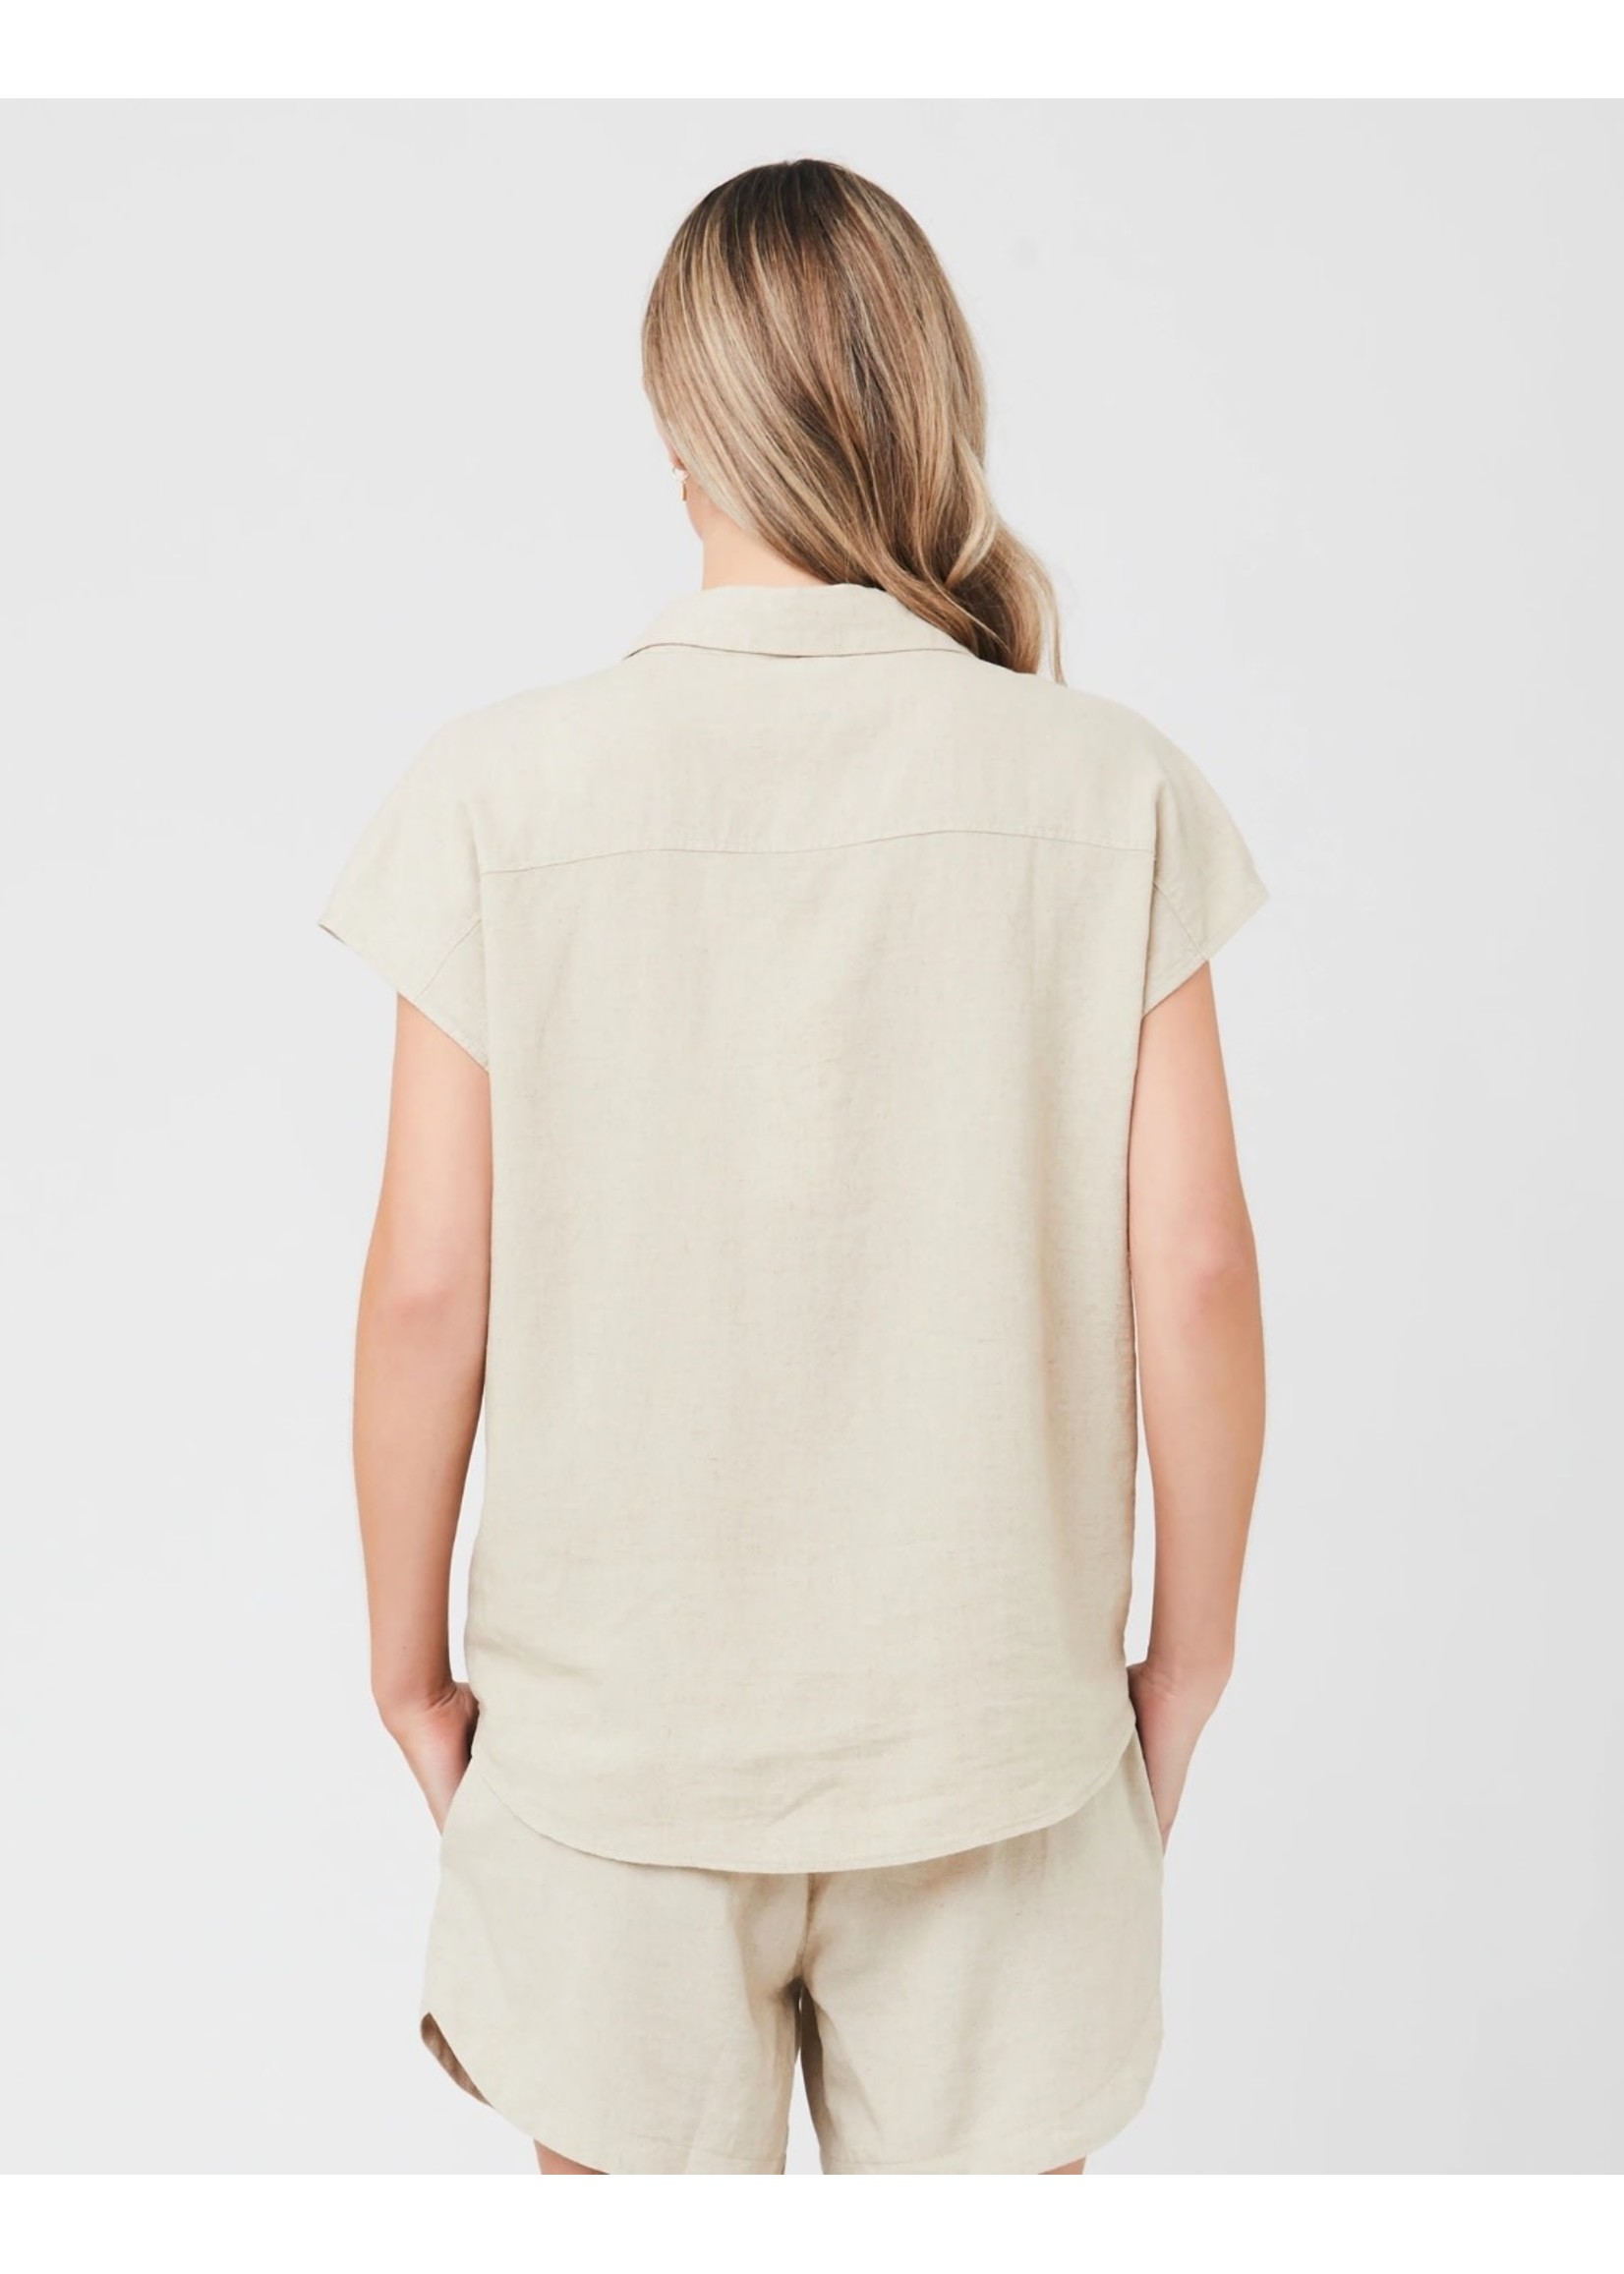 Ripe Maternity Ripe Maternity, Eve Relaxed Shirt in Natural